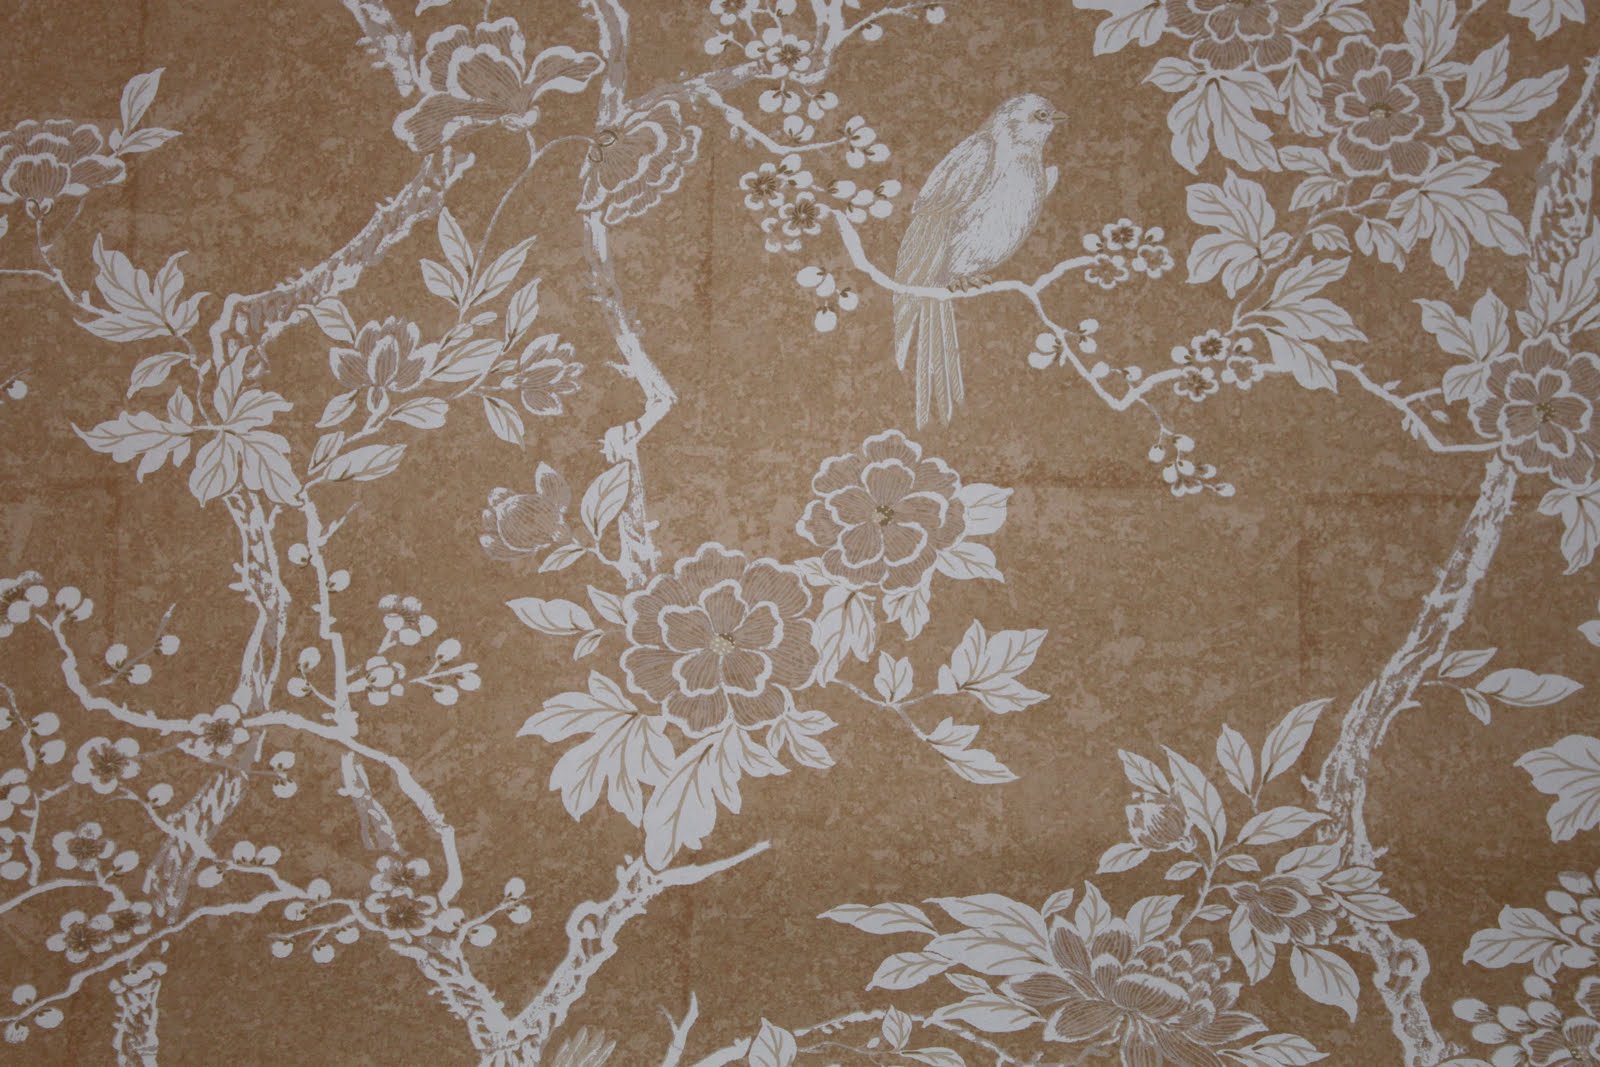 Discontinued Wallpaper By Laura Ashley